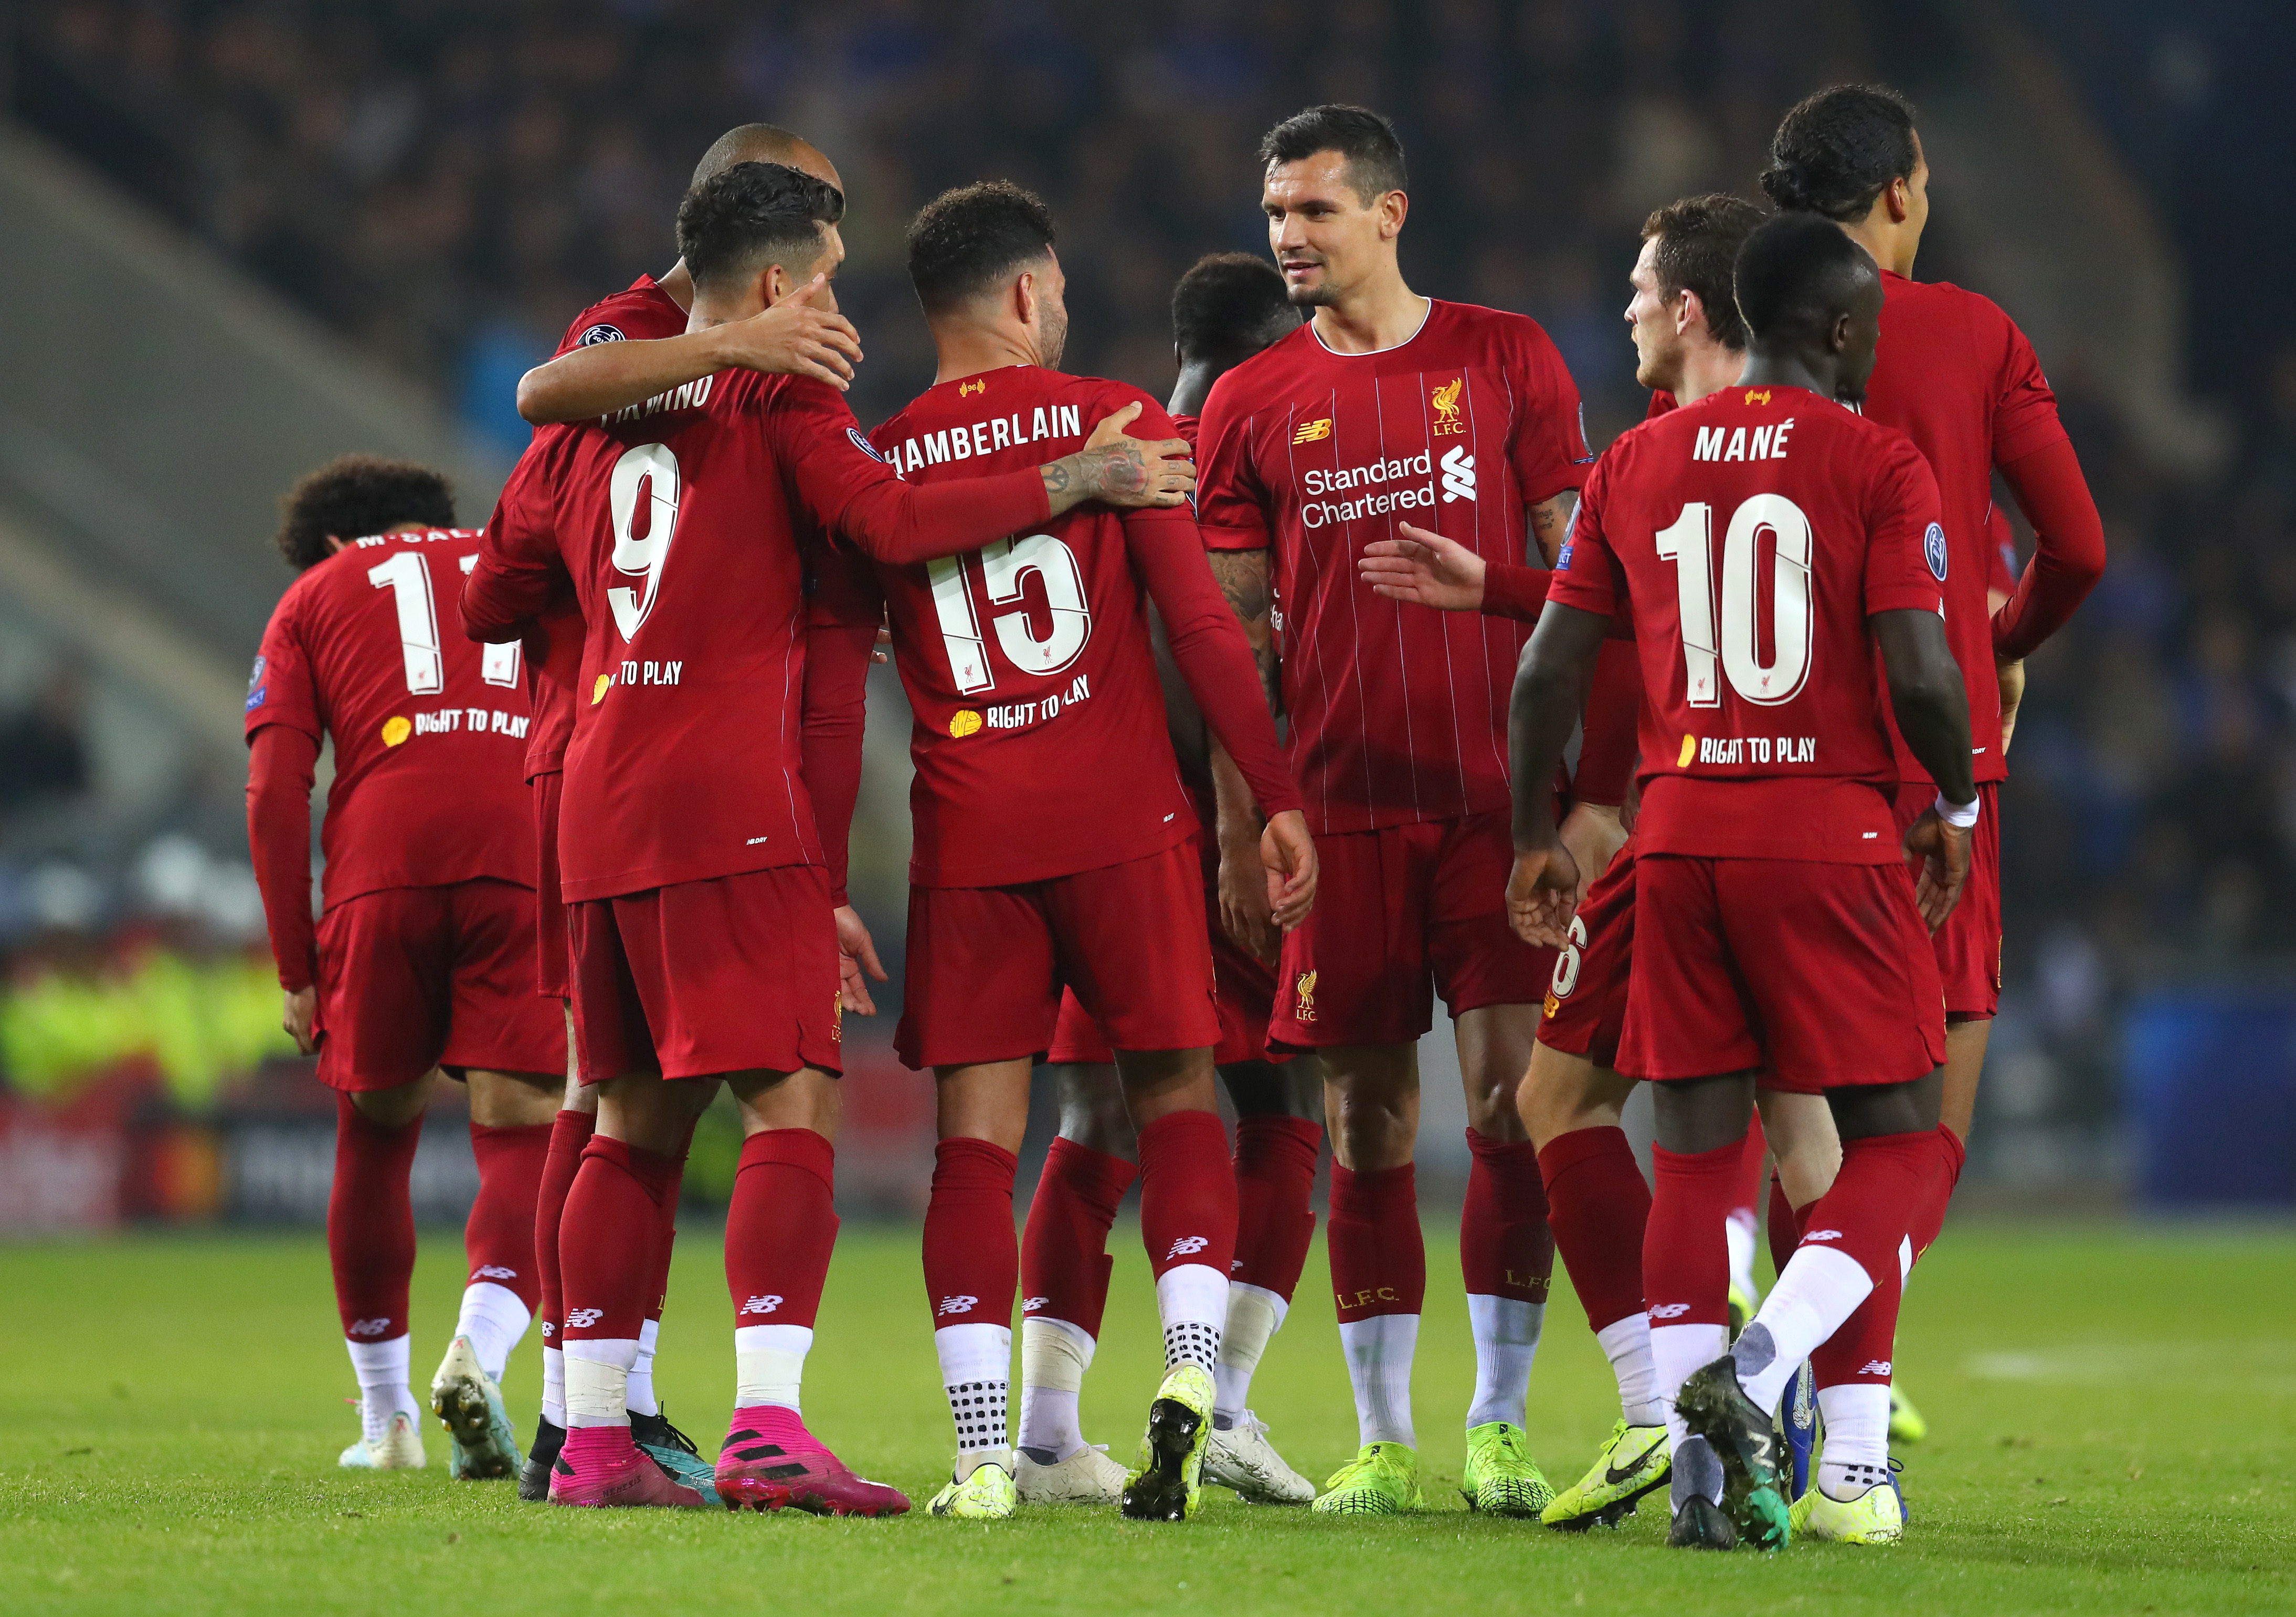 GENK, BELGIUM - OCTOBER 23: Alex Oxlade-Chamberlain of Liverpool celebrates with teammates after scoring his team's second goal during the UEFA Champions League group E match between KRC Genk and Liverpool FC at Luminus Arena on October 23, 2019 in Genk, Belgium. (Photo by Catherine Ivill/Getty Images)